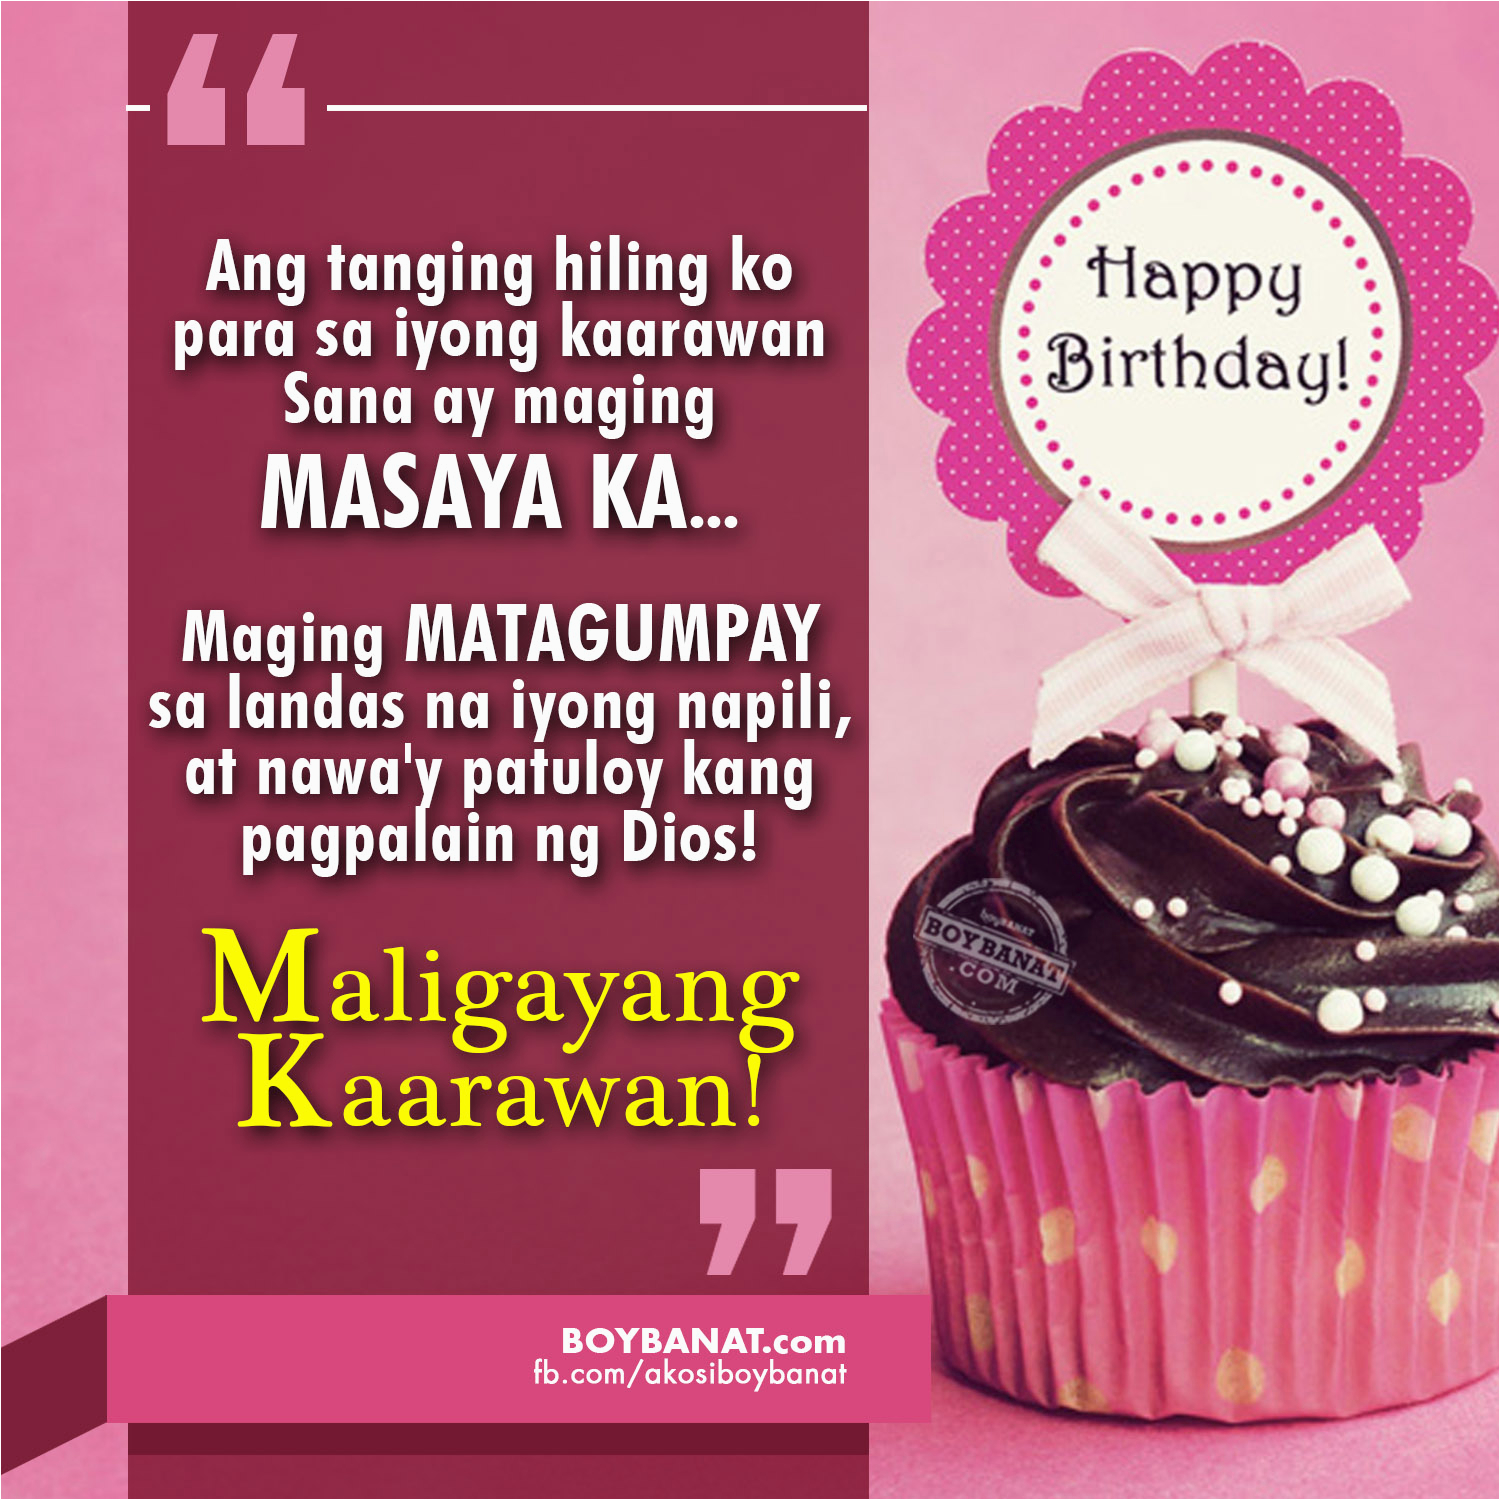 Happy Birthday to Me Quotes Tagalog Happy Birthday Quotes and Heartfelt Birthday Messages